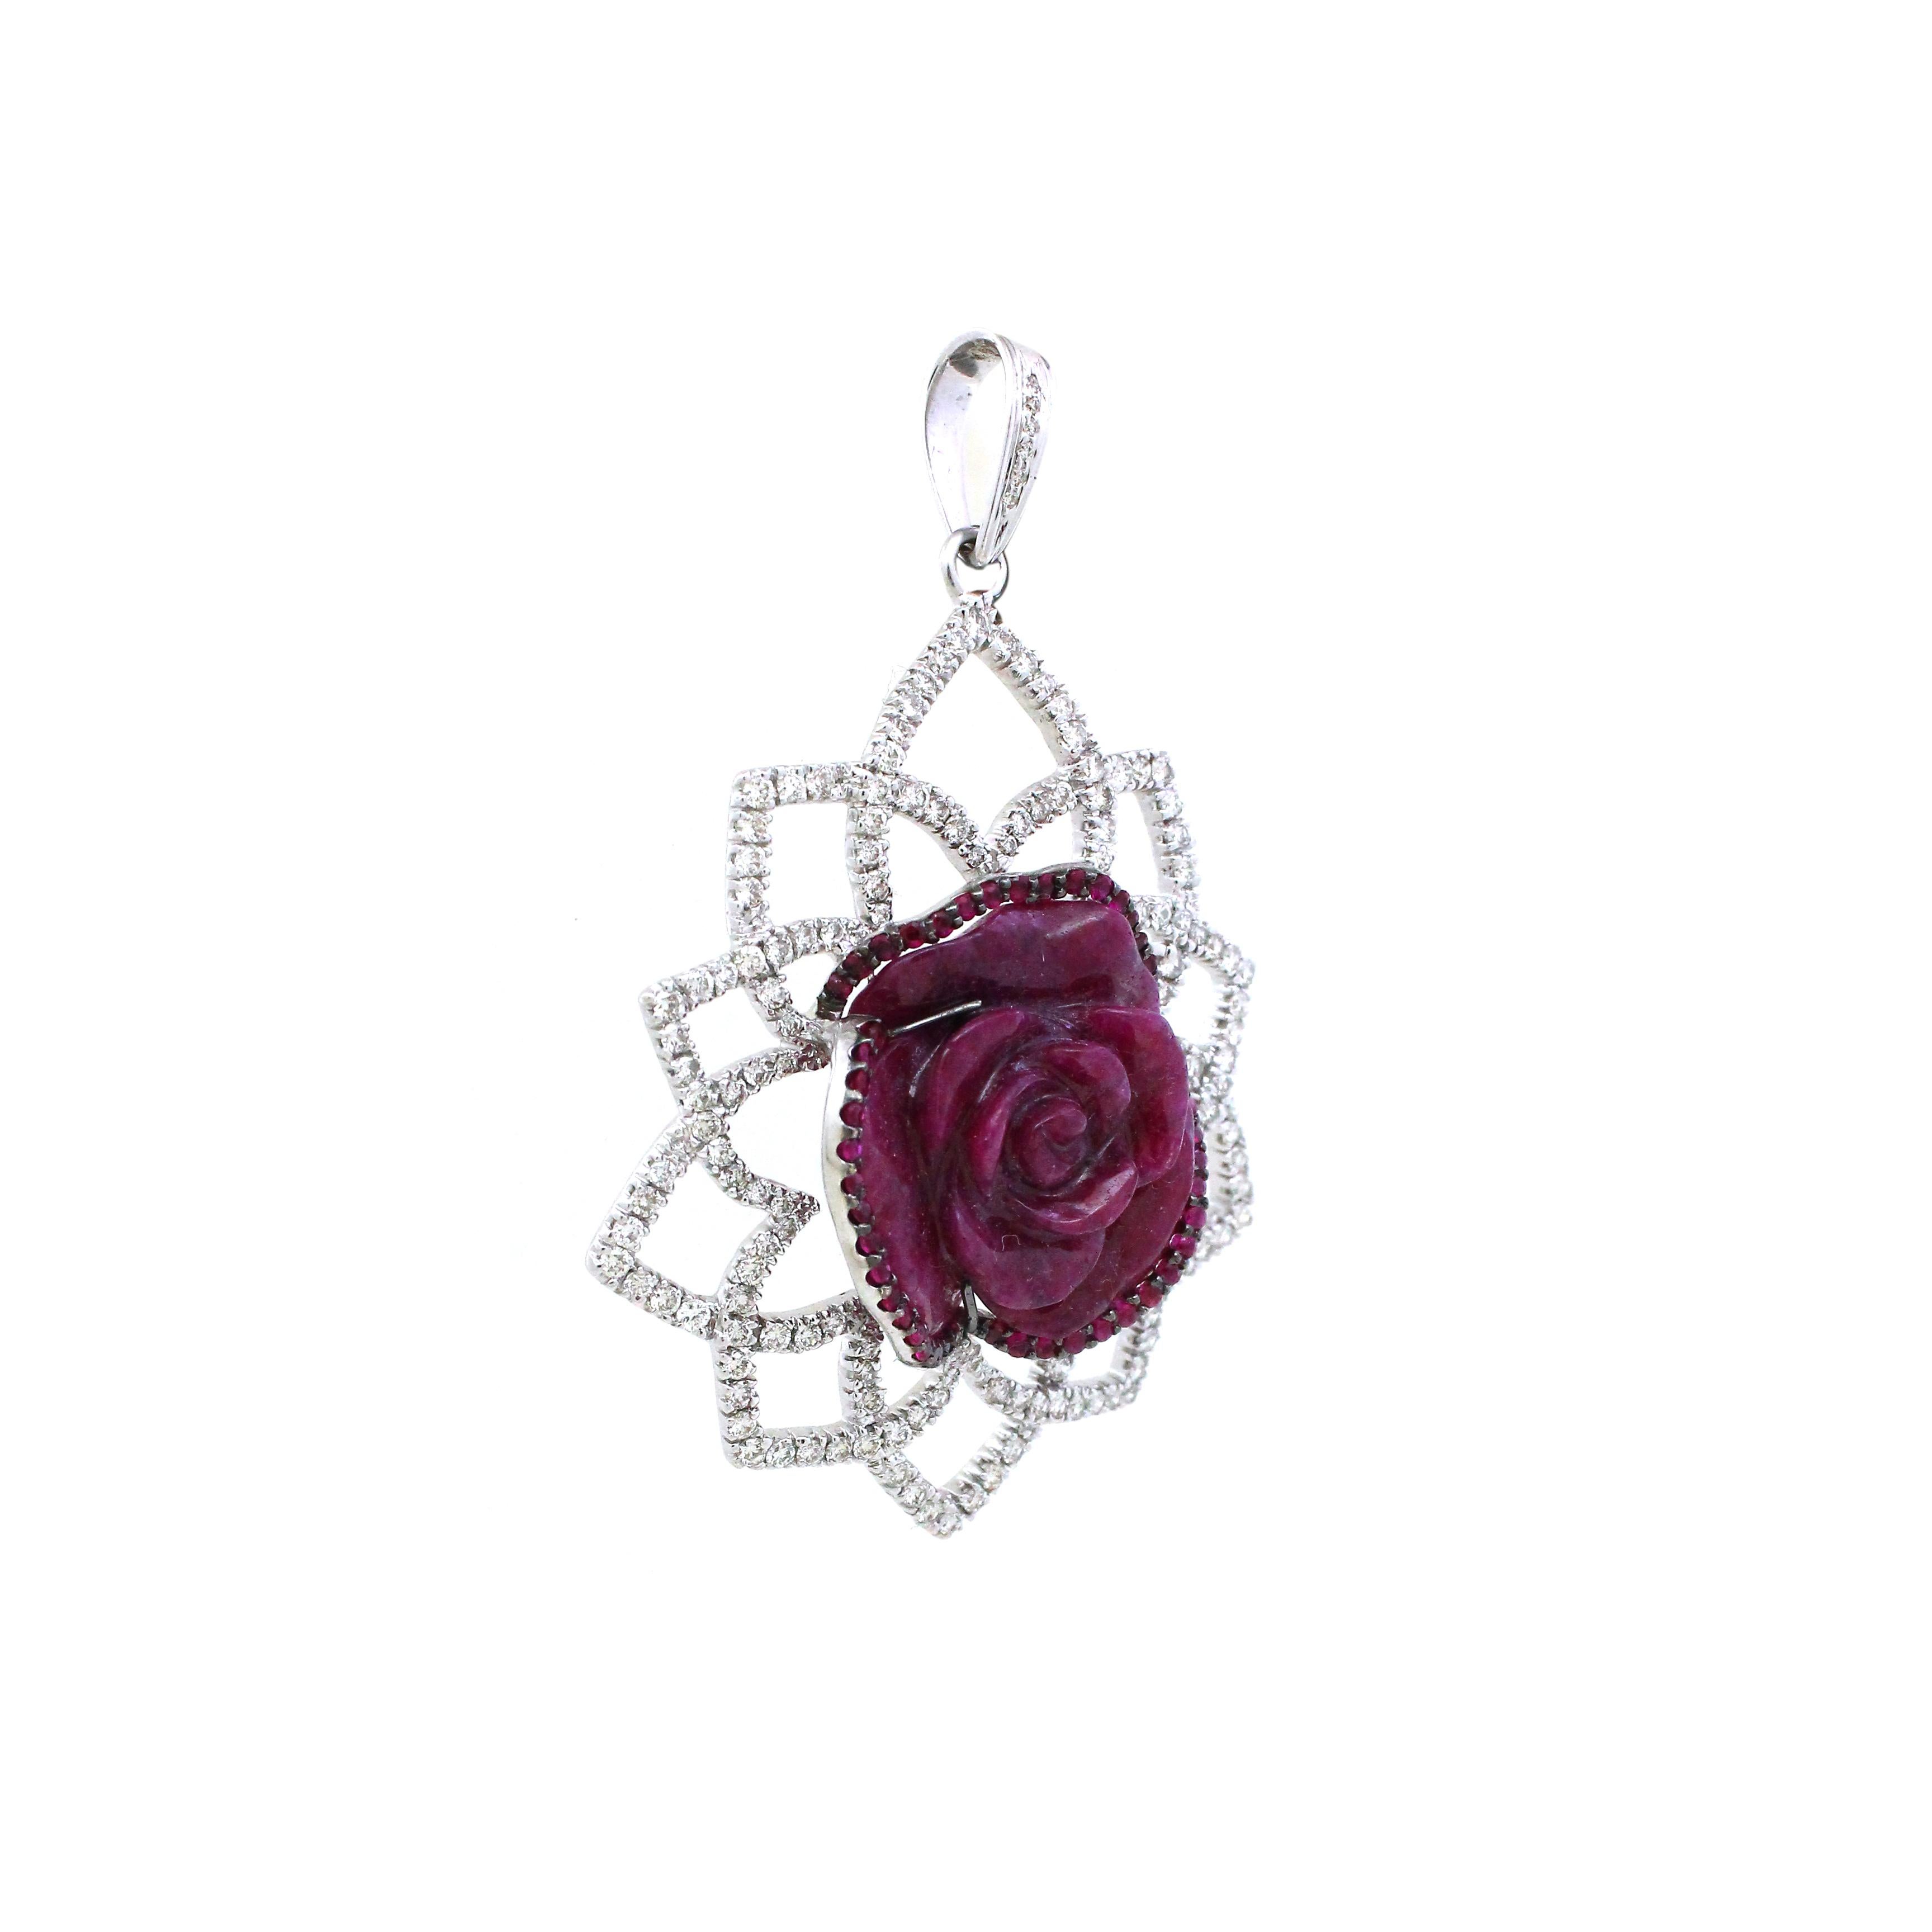 Prepare to be enchanted by our luxurious pendant, meticulously crafted from gleaming 18k white gold, boasting a substantial weight of 18.22 grams. At its core lies a mesmerizing centerpiece—a single carved ruby meticulously shaped into the exquisite